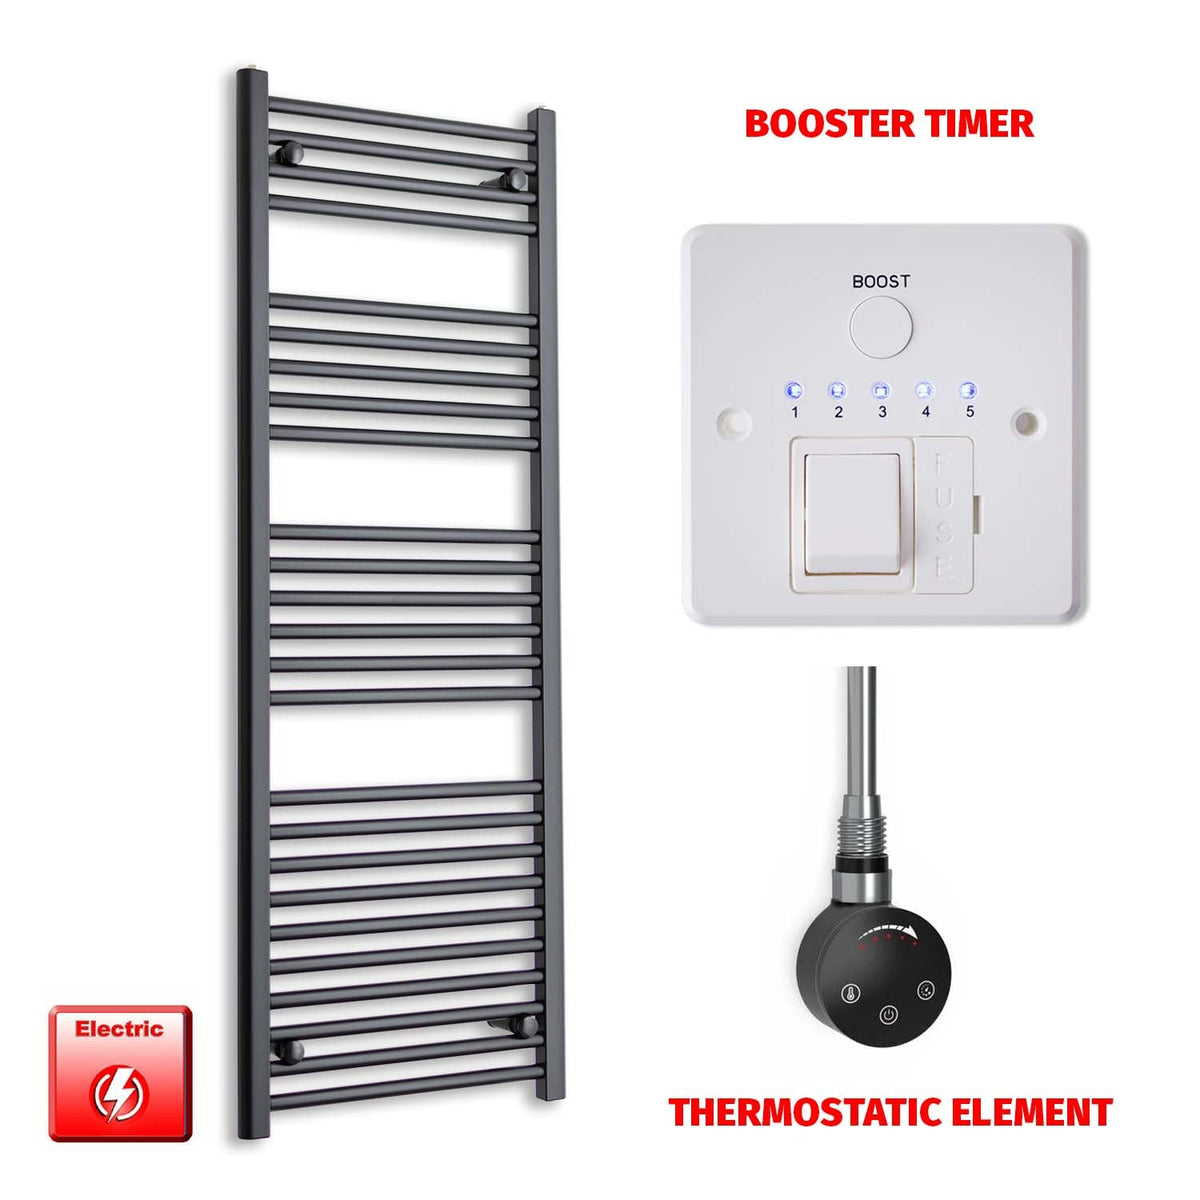 1400mm High 600mm Wide Flat Black Pre-Filled Electric Heated Towel Rail Radiator HTR Smart Thermostatic Booster Timer